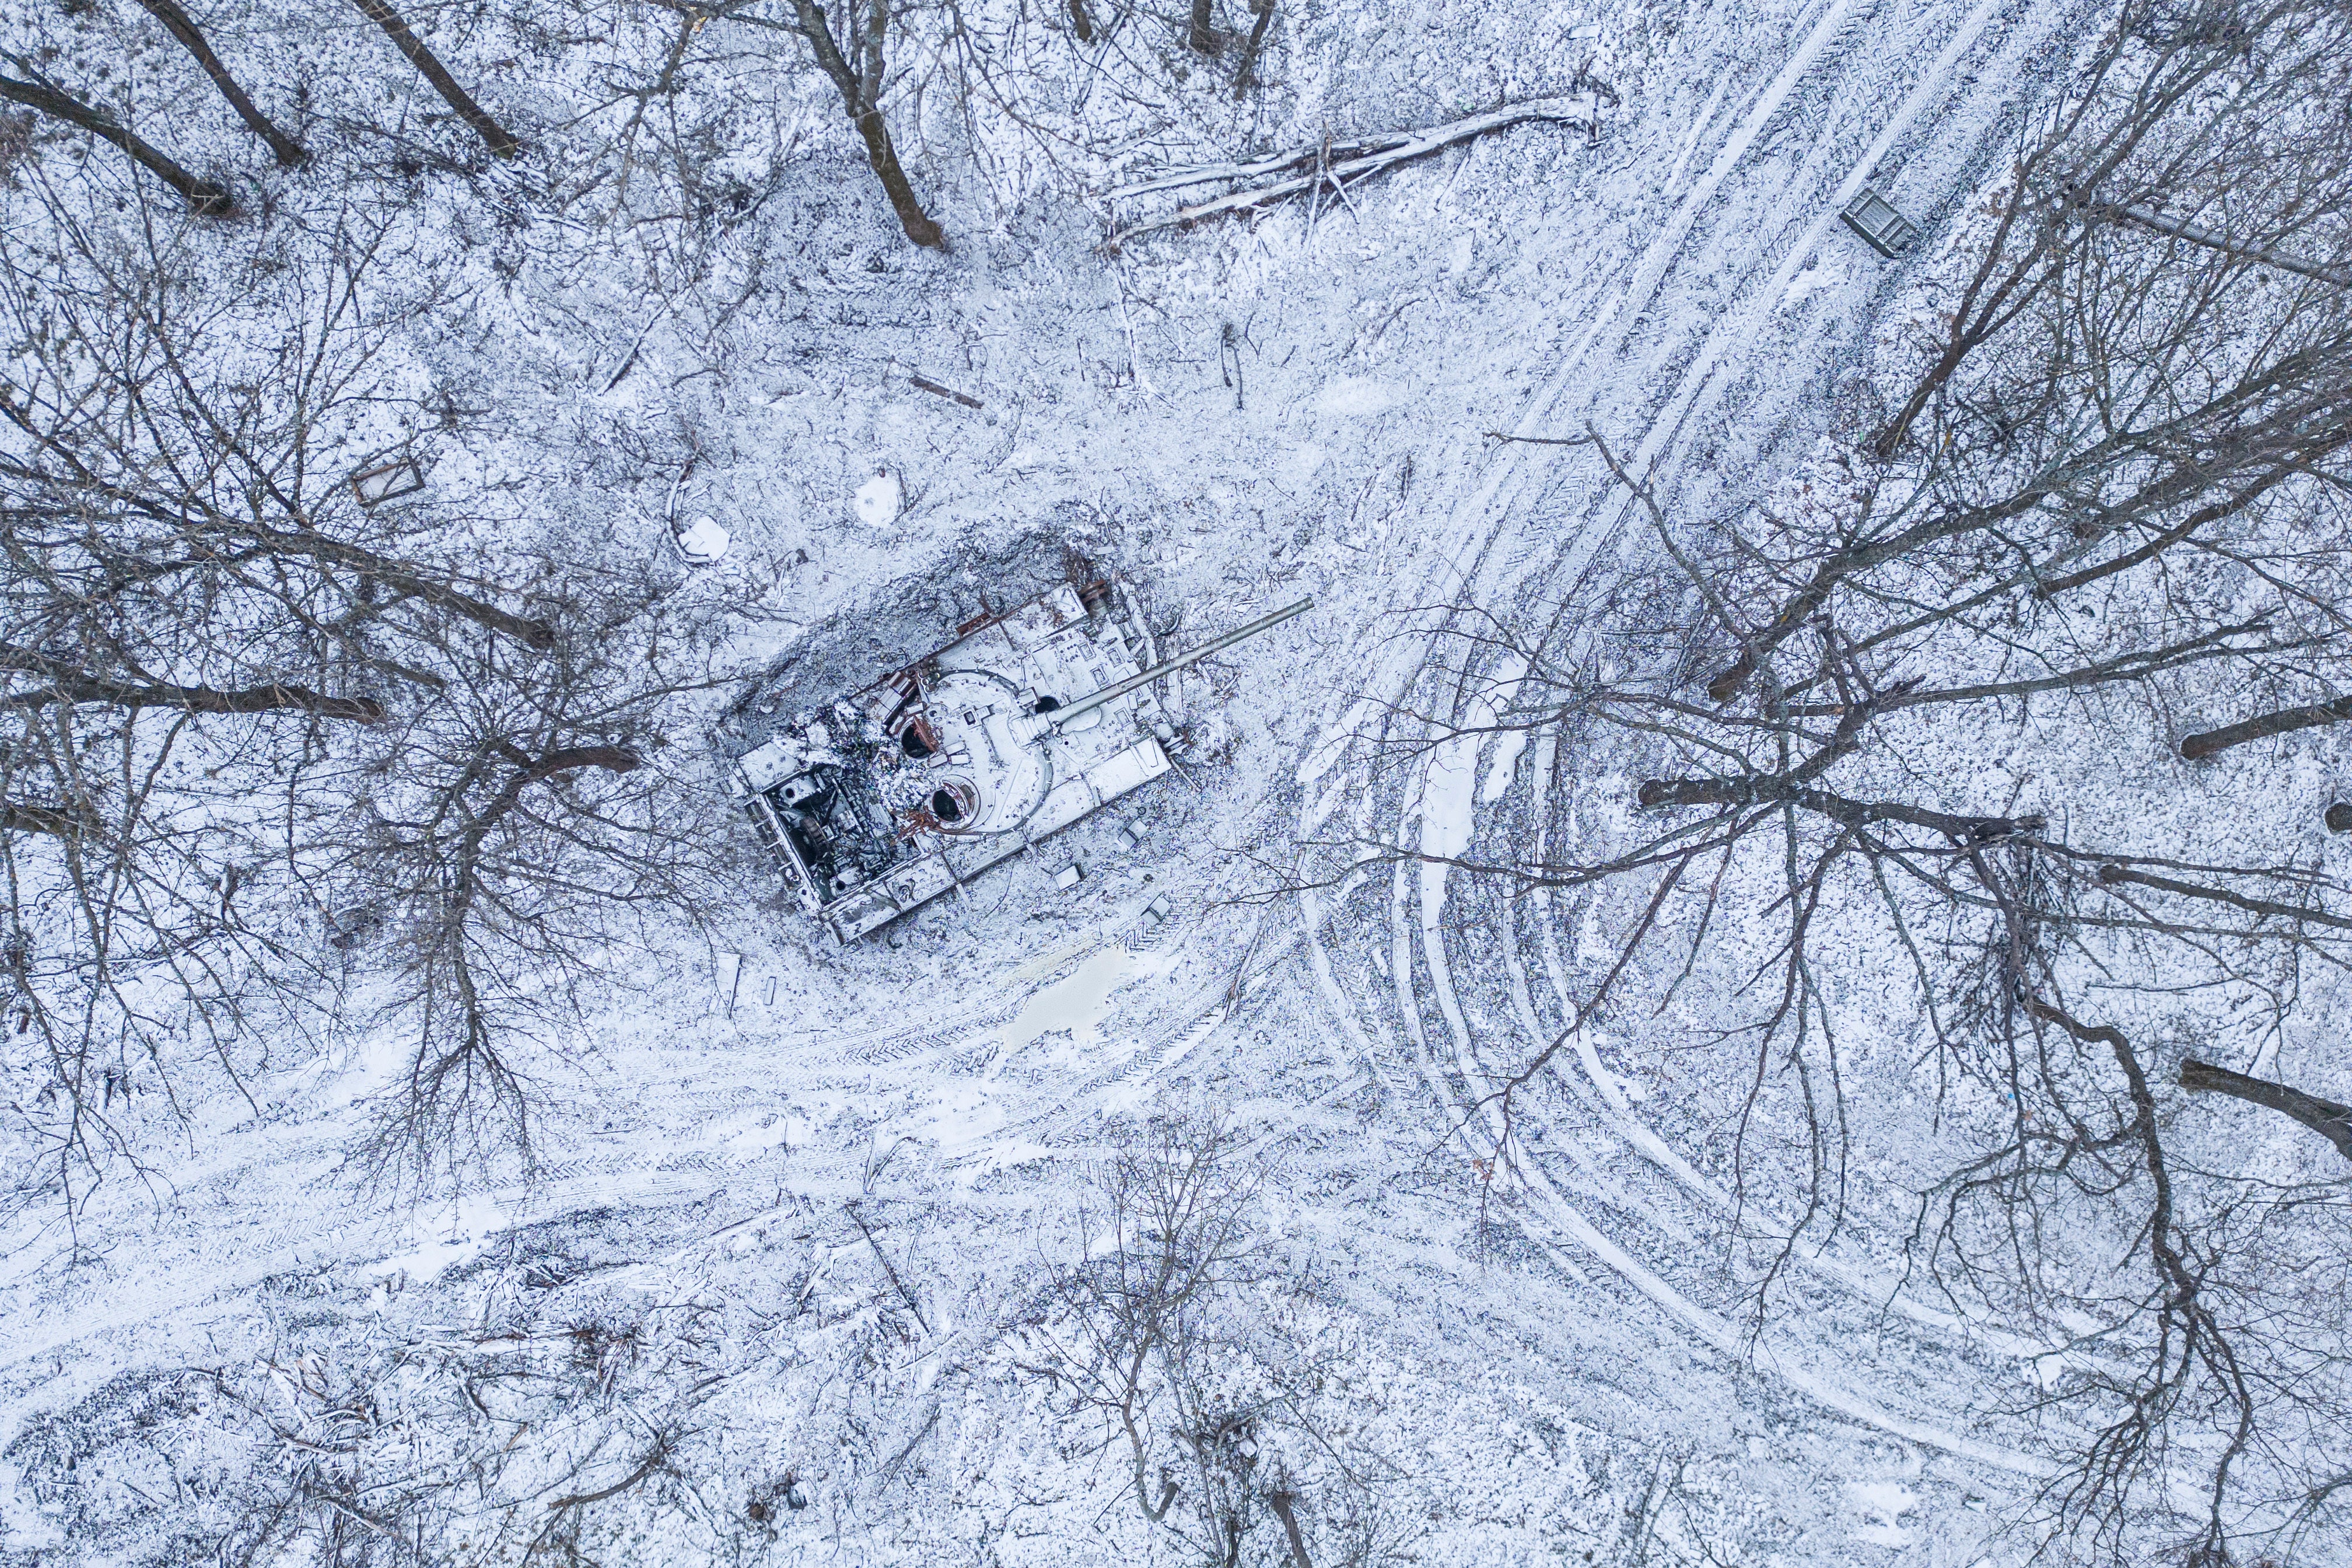 A destroyed Russian tank covered by snow stands in a forest in the Kharkiv region, Ukraine